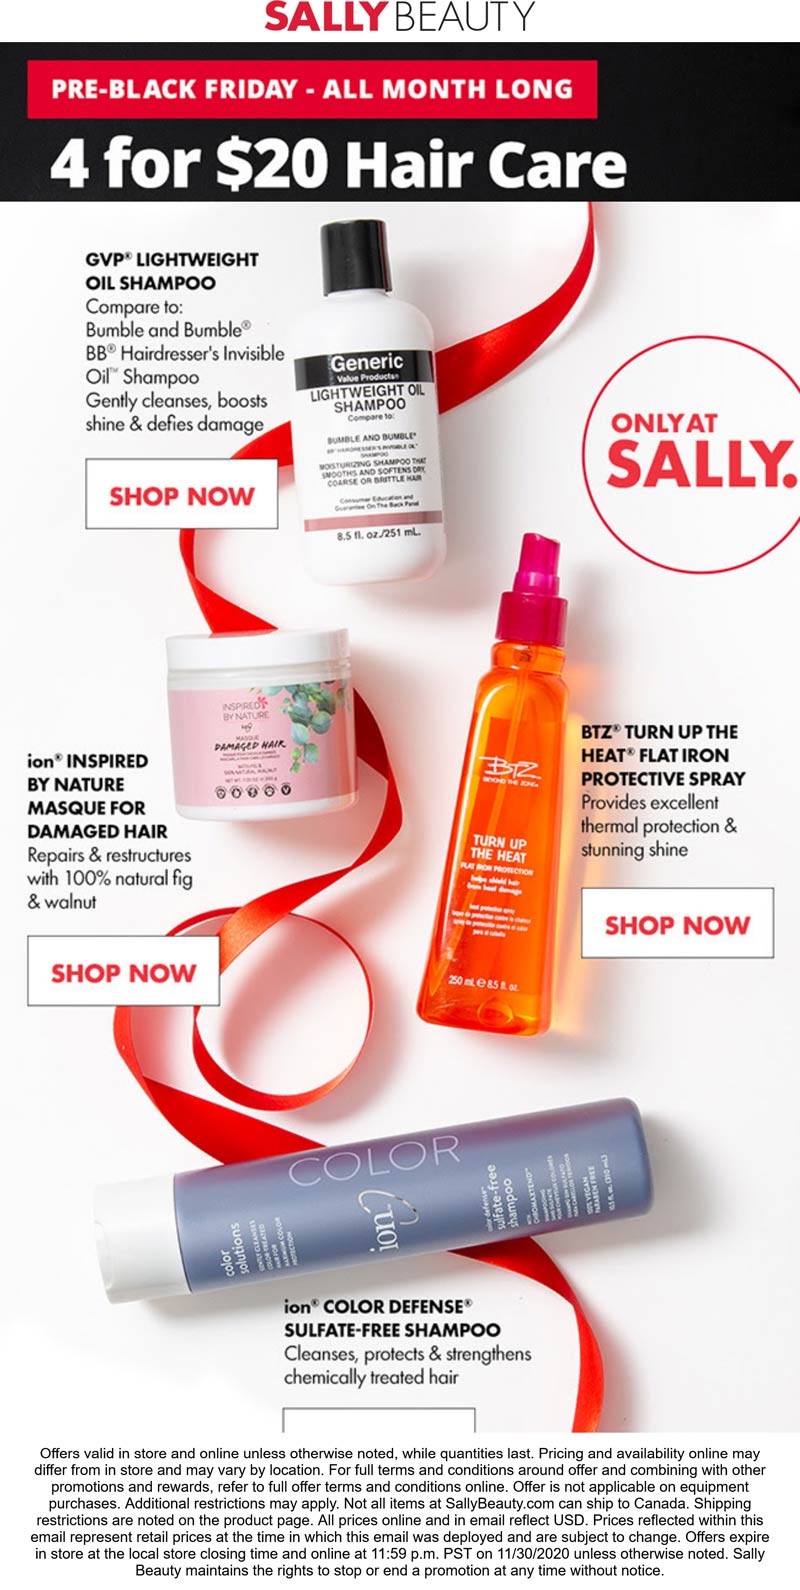 Sally Beauty stores Coupon  4 for $20 on hair care all month at Sally Beauty, ditto online #sallybeauty 